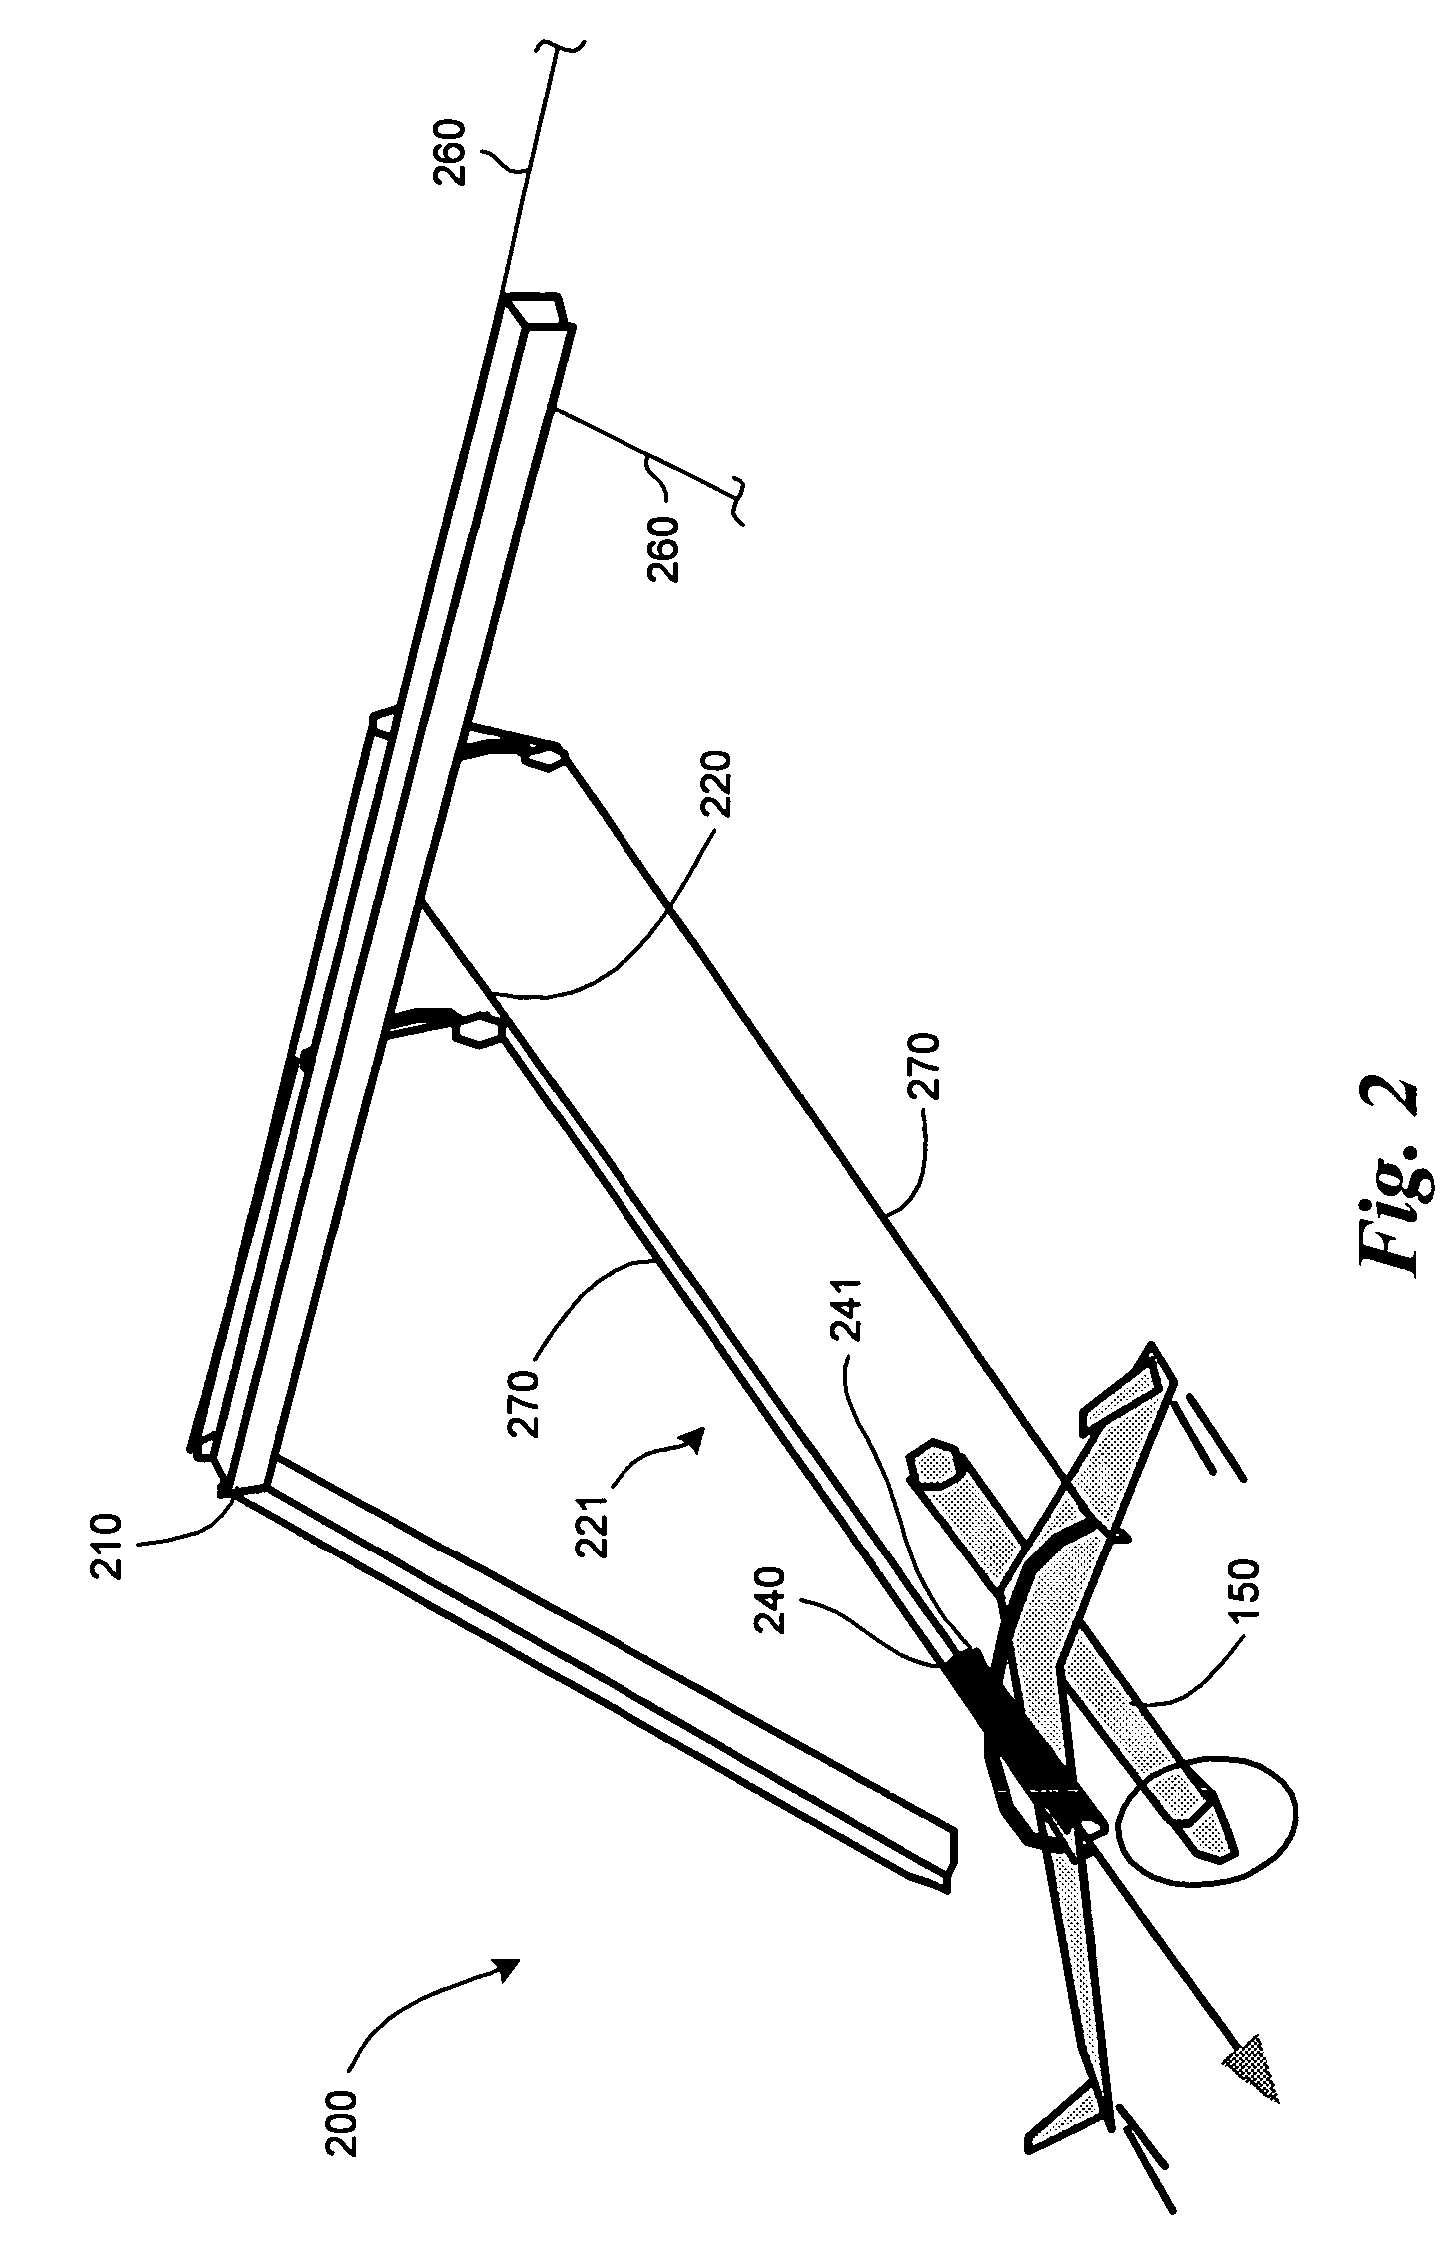 Methods and apparatuses for launching airborne devices along flexible elongated members